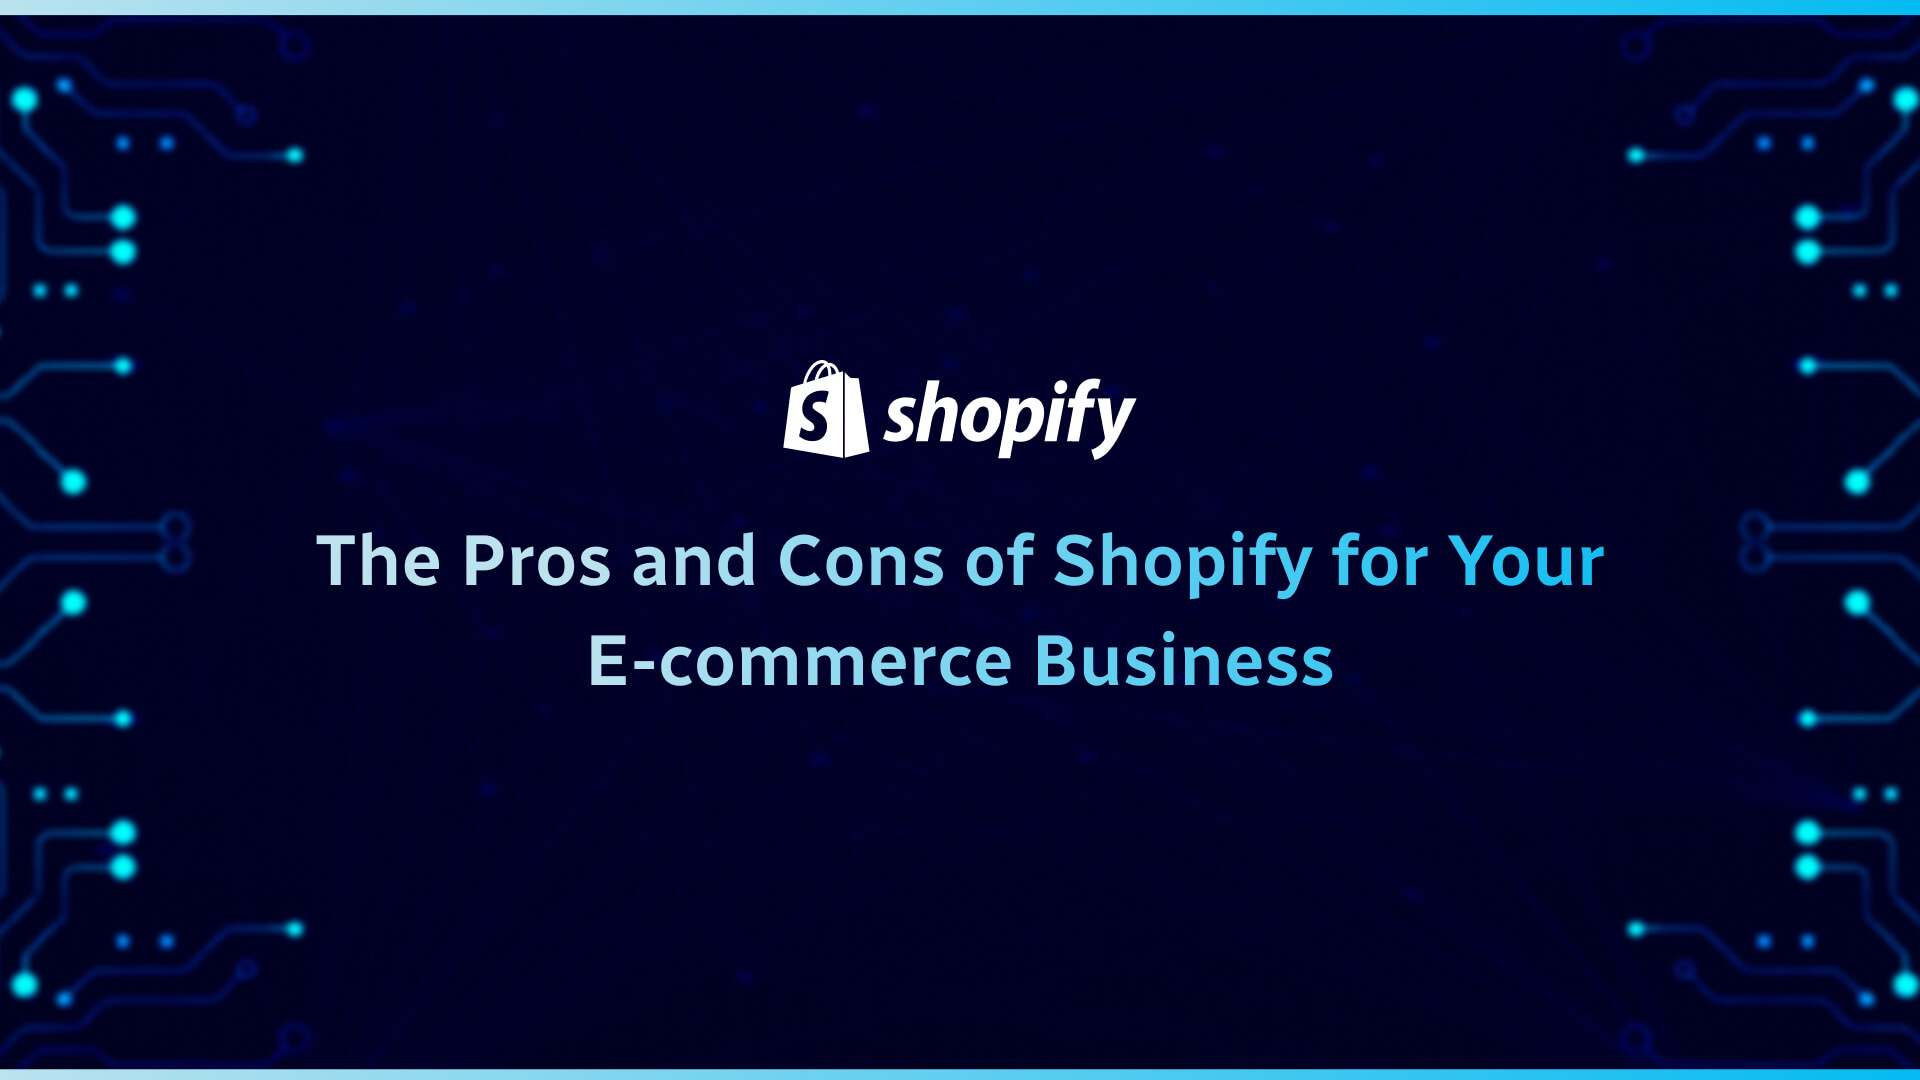 The Pros and Cons of Shopify for Your E-commerce Business